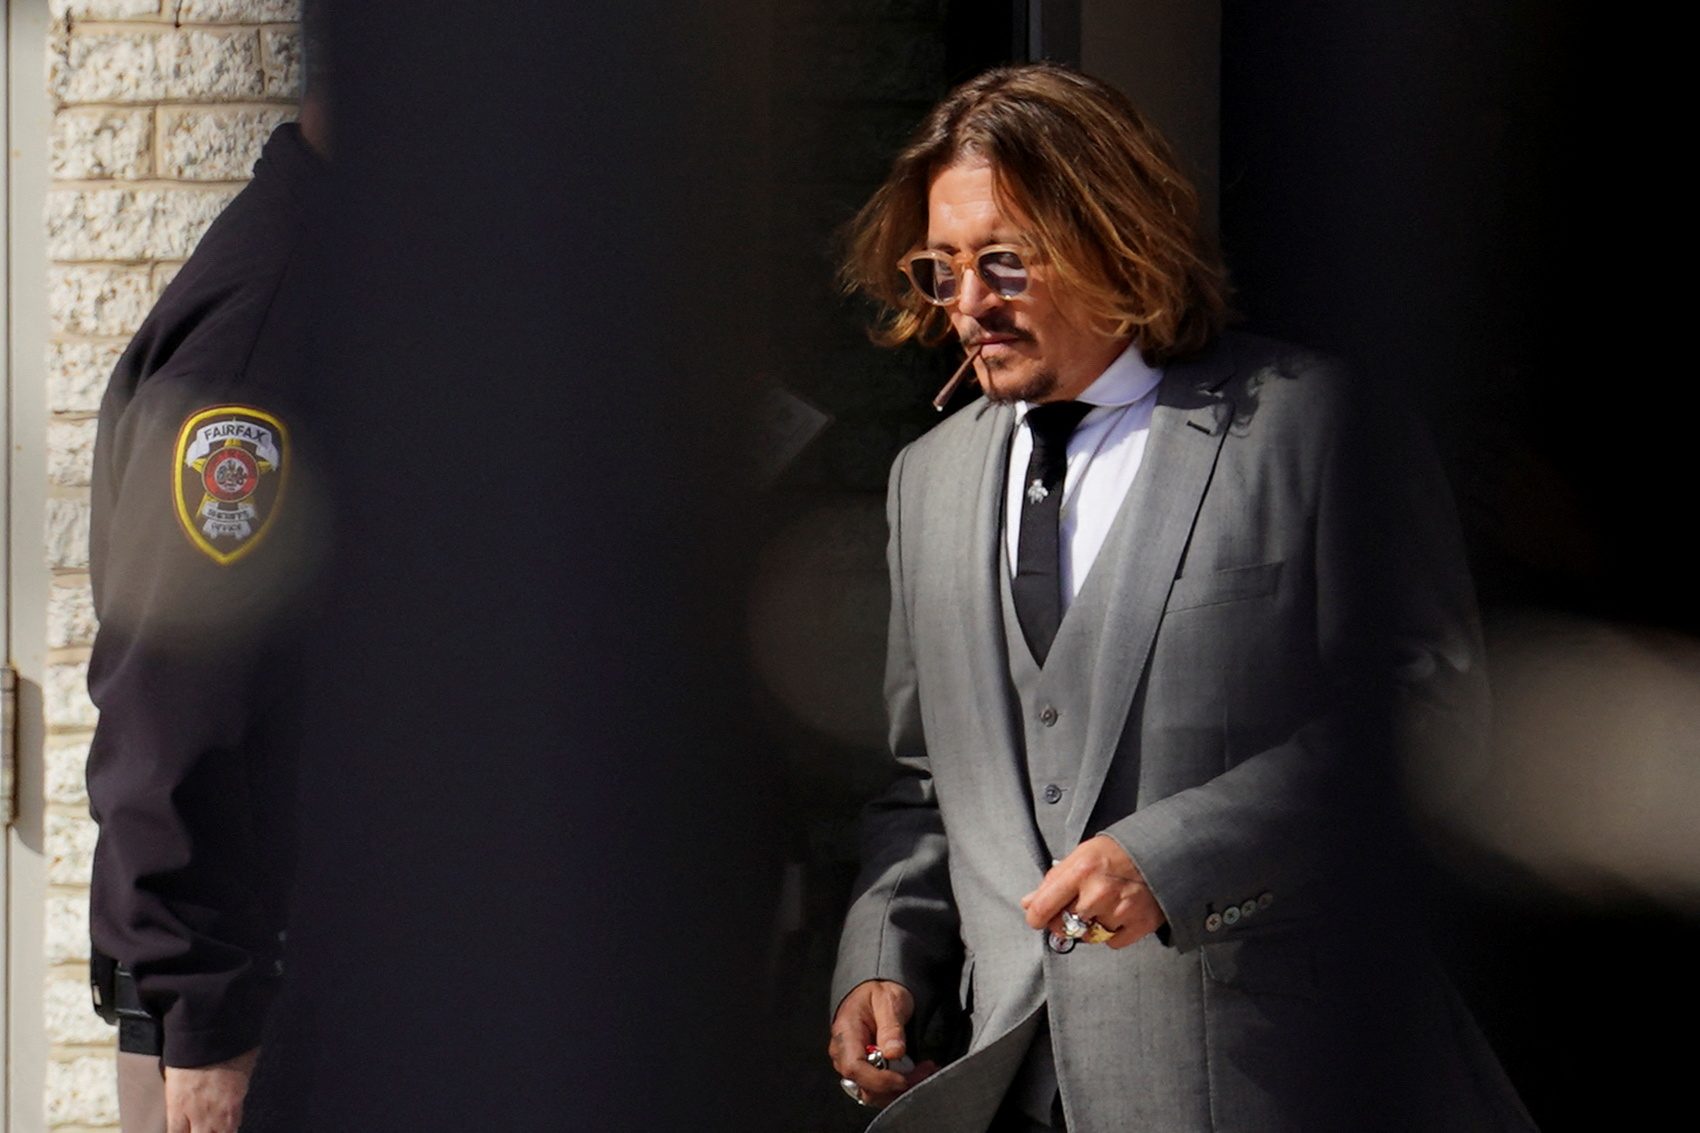 Johnny Depp and Amber Heard face off again in US libel trial